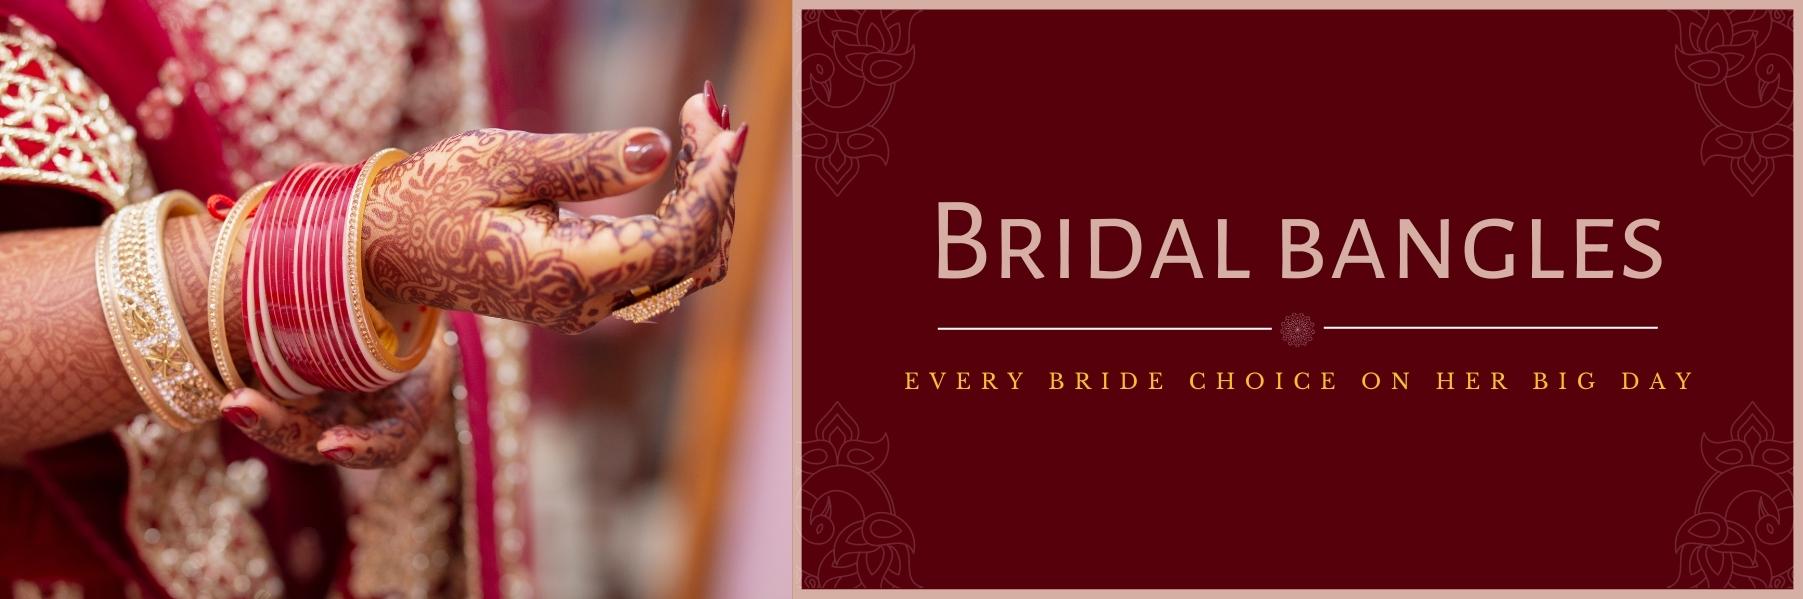 Bridal Bangles: Shining through the Ages in Indian Weddings